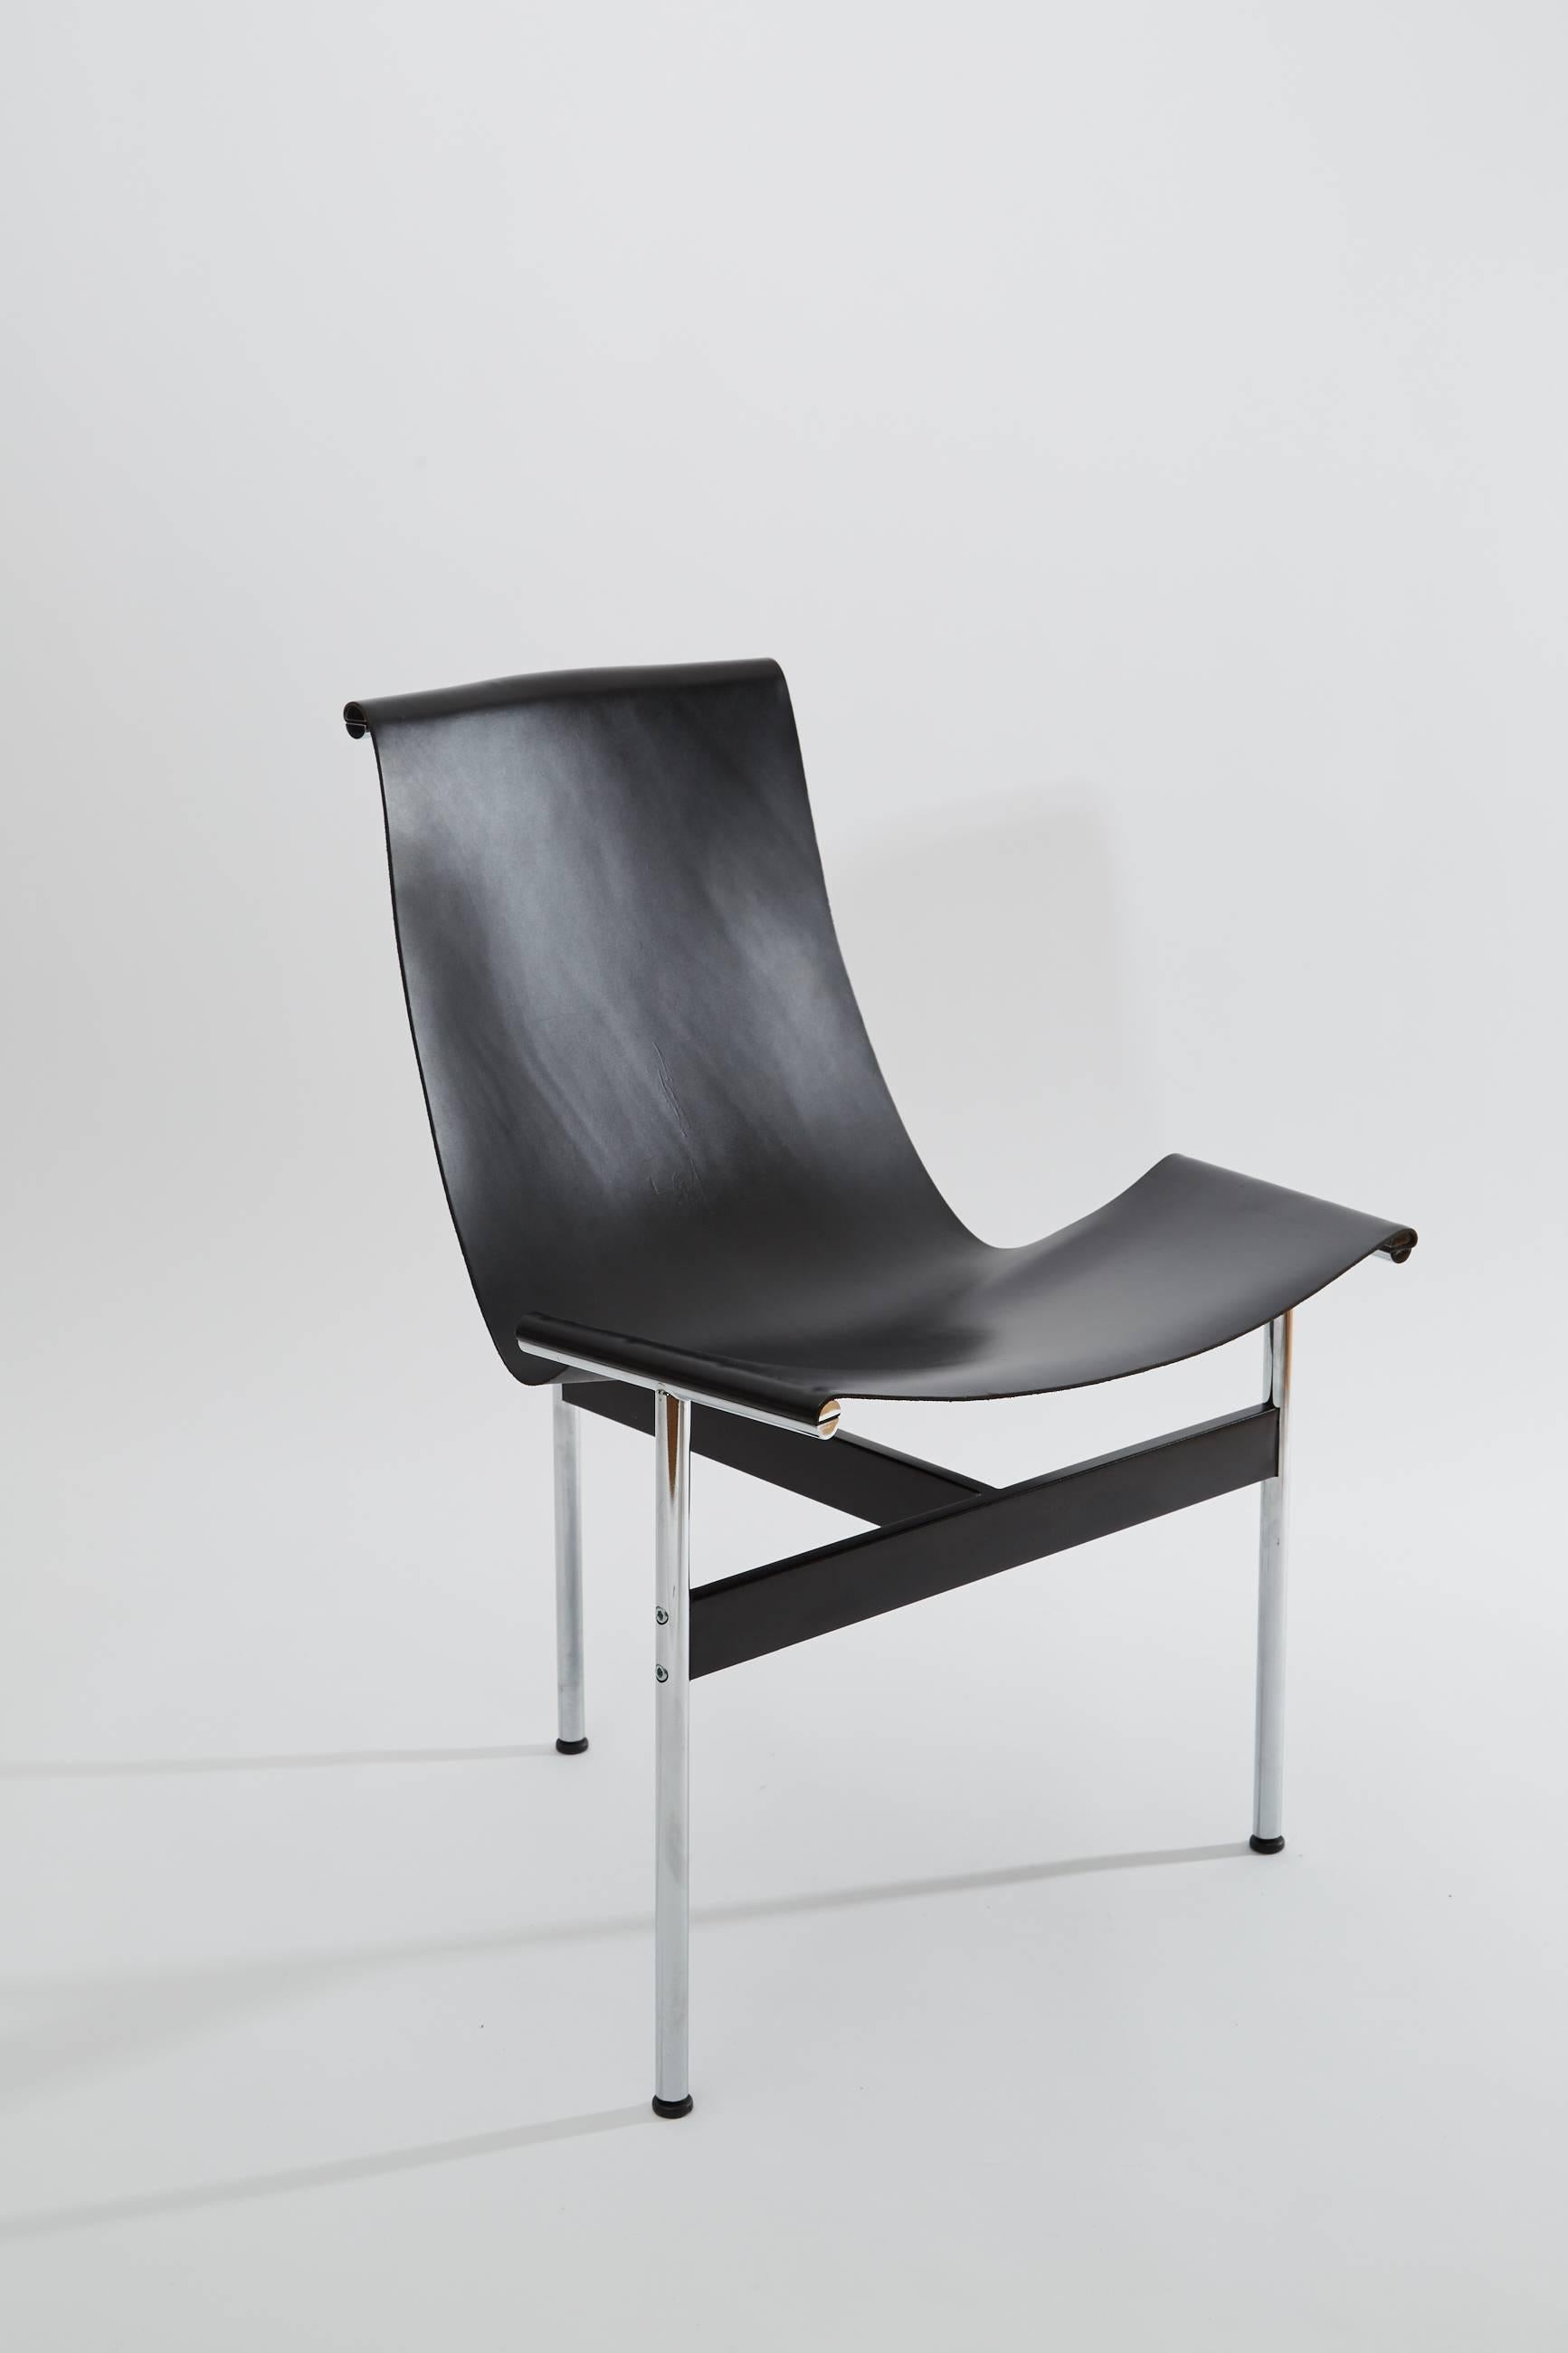 Katavolos Littell Kelley New York T-Chair Chrome Tripod and Black Leather, 1952 For Sale 1